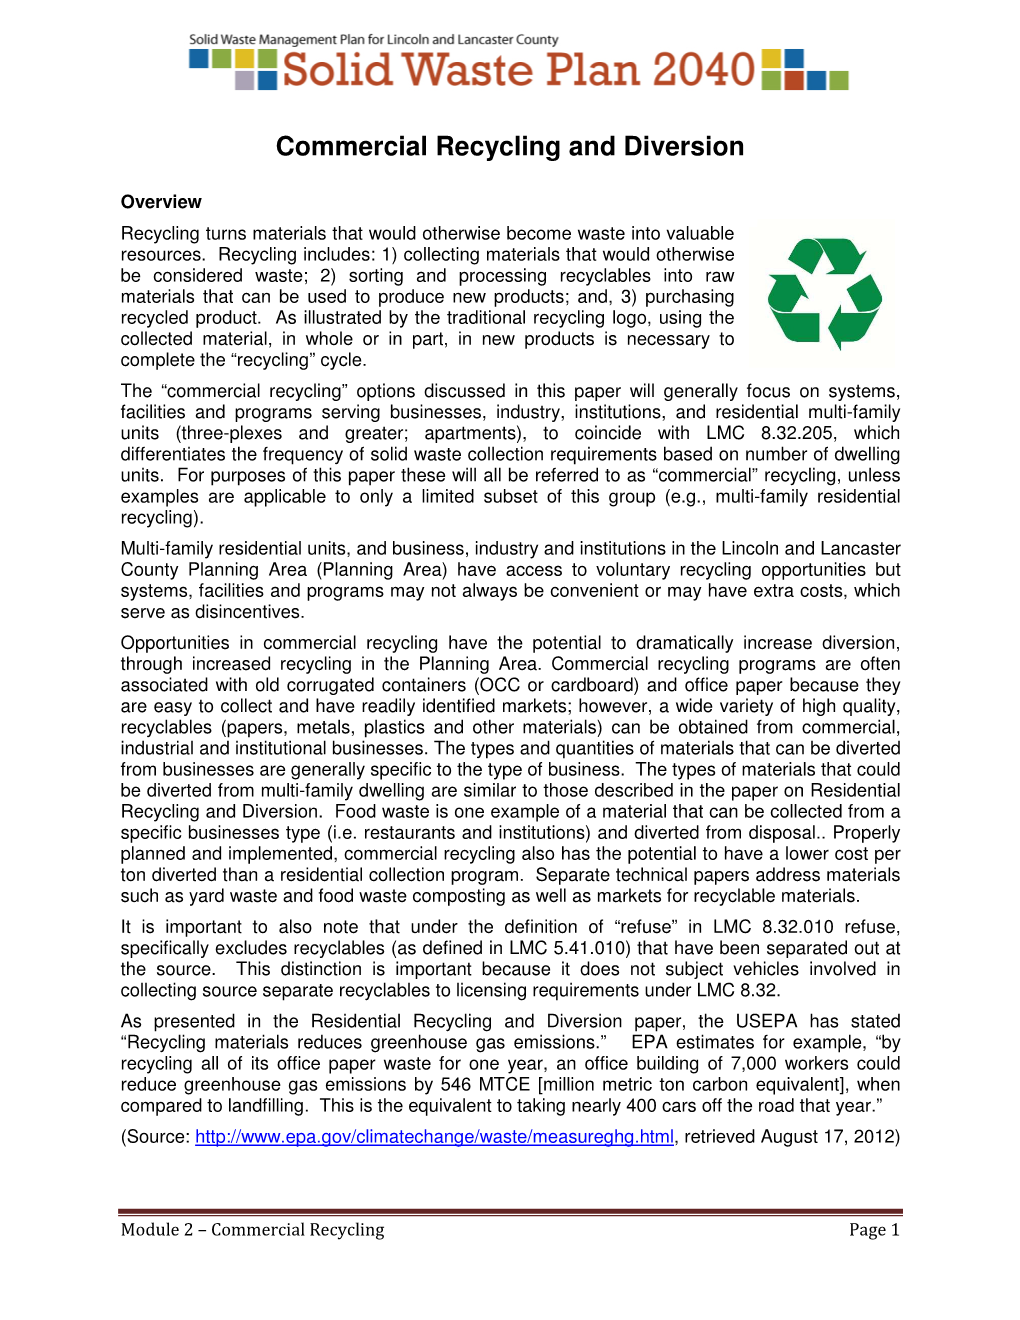 Module 2 – Commercial Recycling Page 1